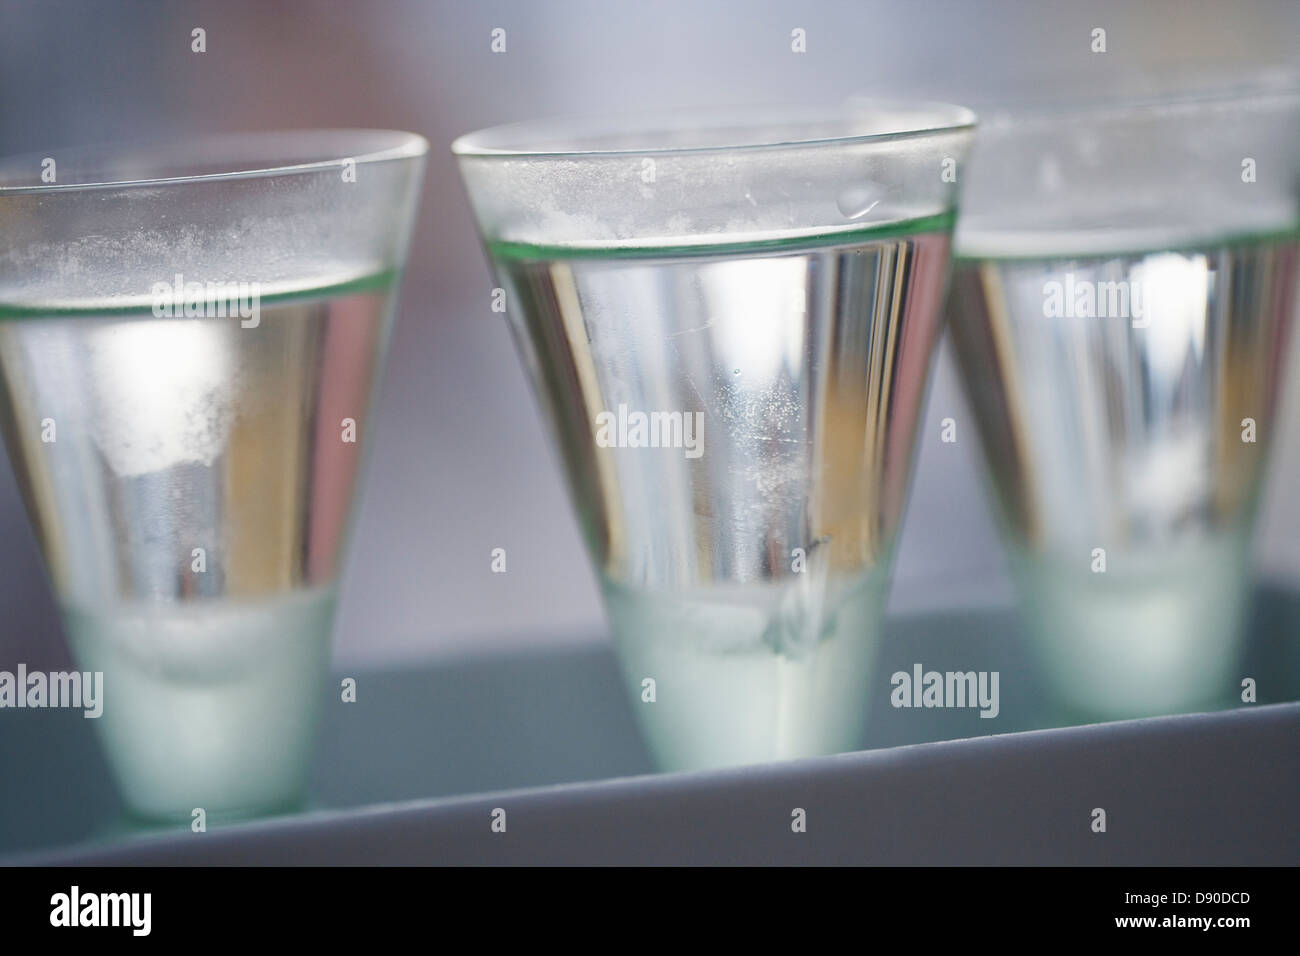 Three glasses of snaps, close-up, Sweden. Stock Photo